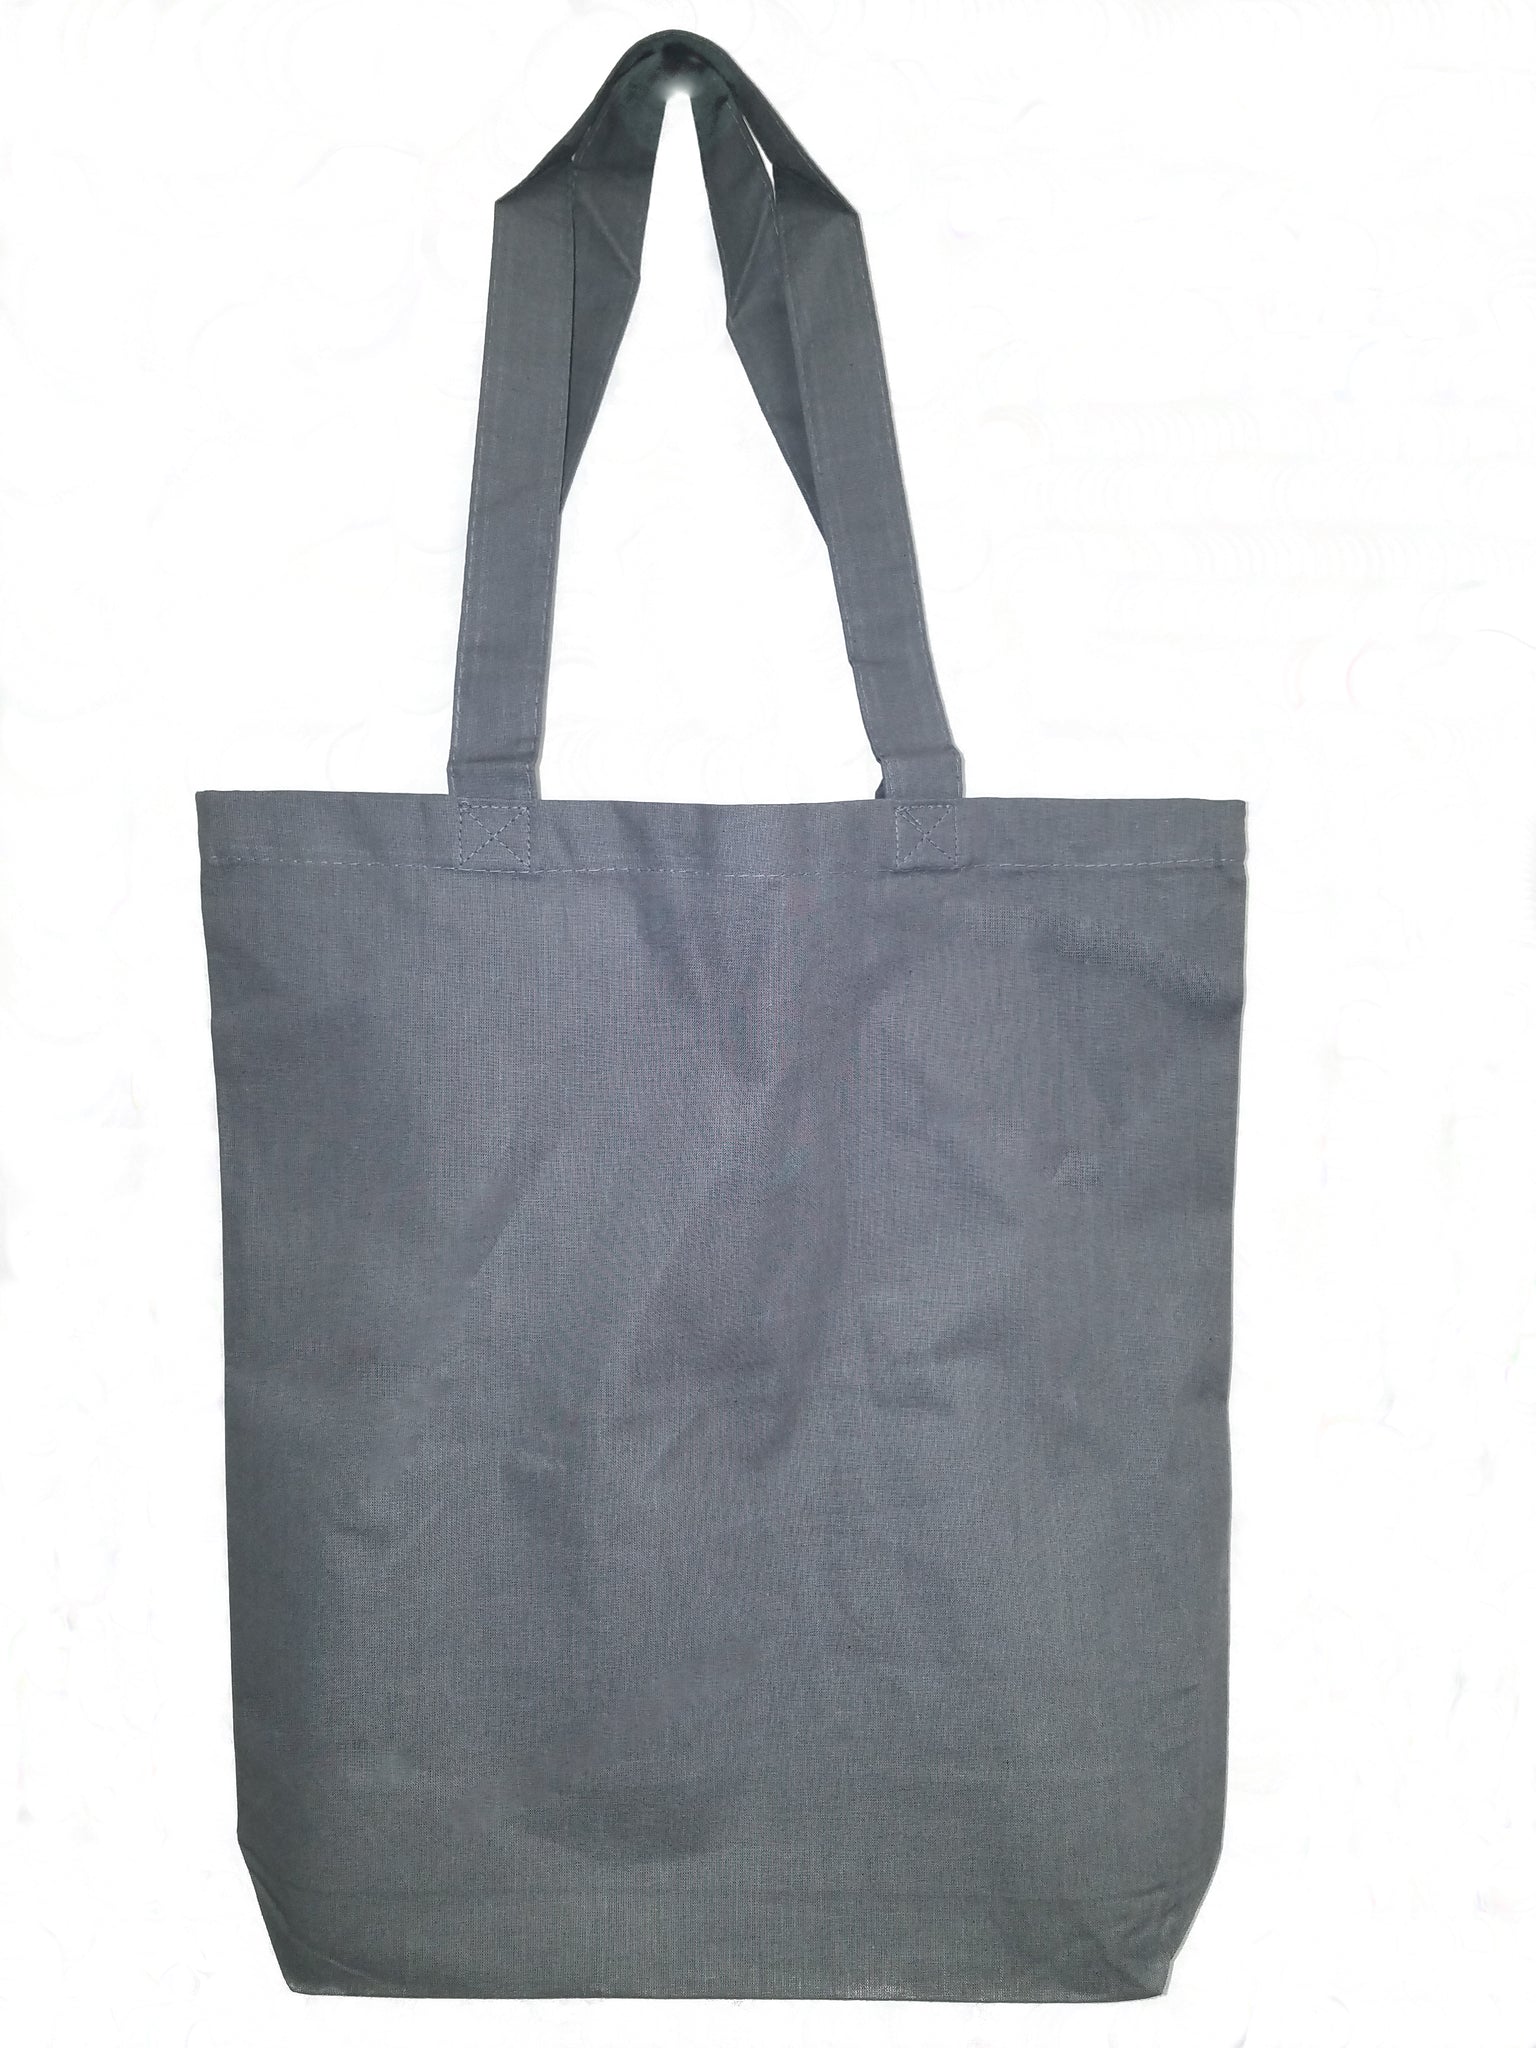 Custom 10oz Canvas Tote Bags  Wholesale Blank Tote Bags Bulk from $2.39